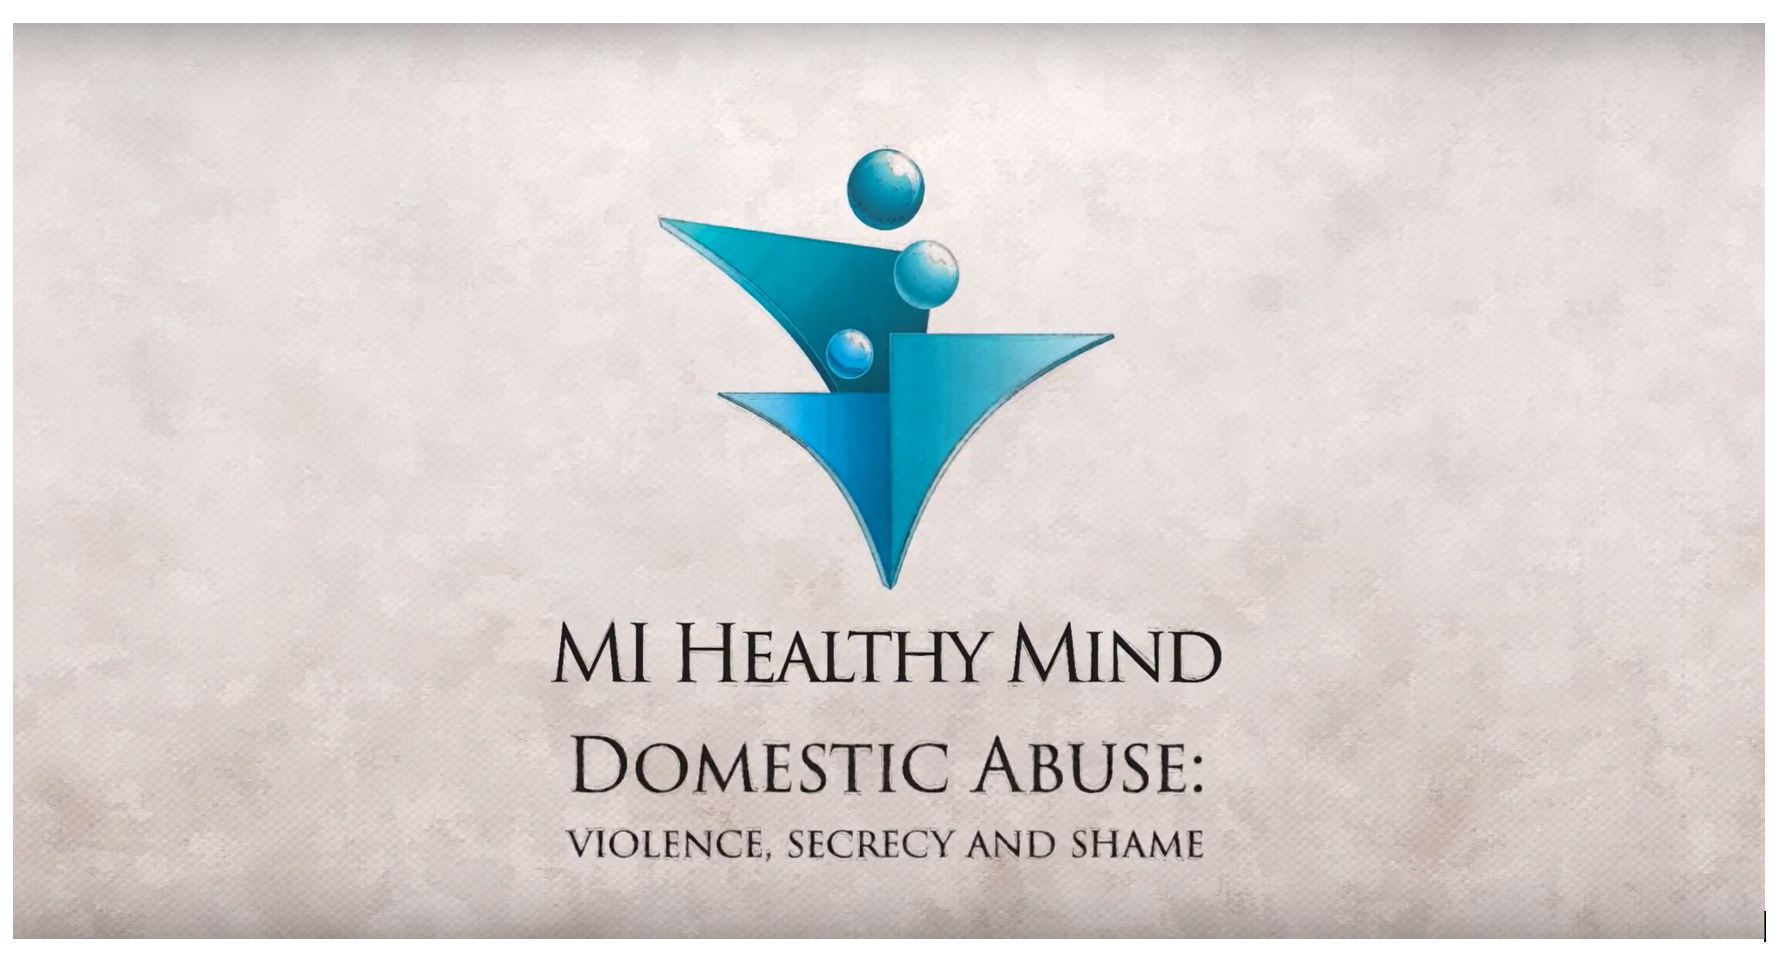 DOMESTIC ABUSE: Violence, Secrecy and Shame - NYX Awards Winner 